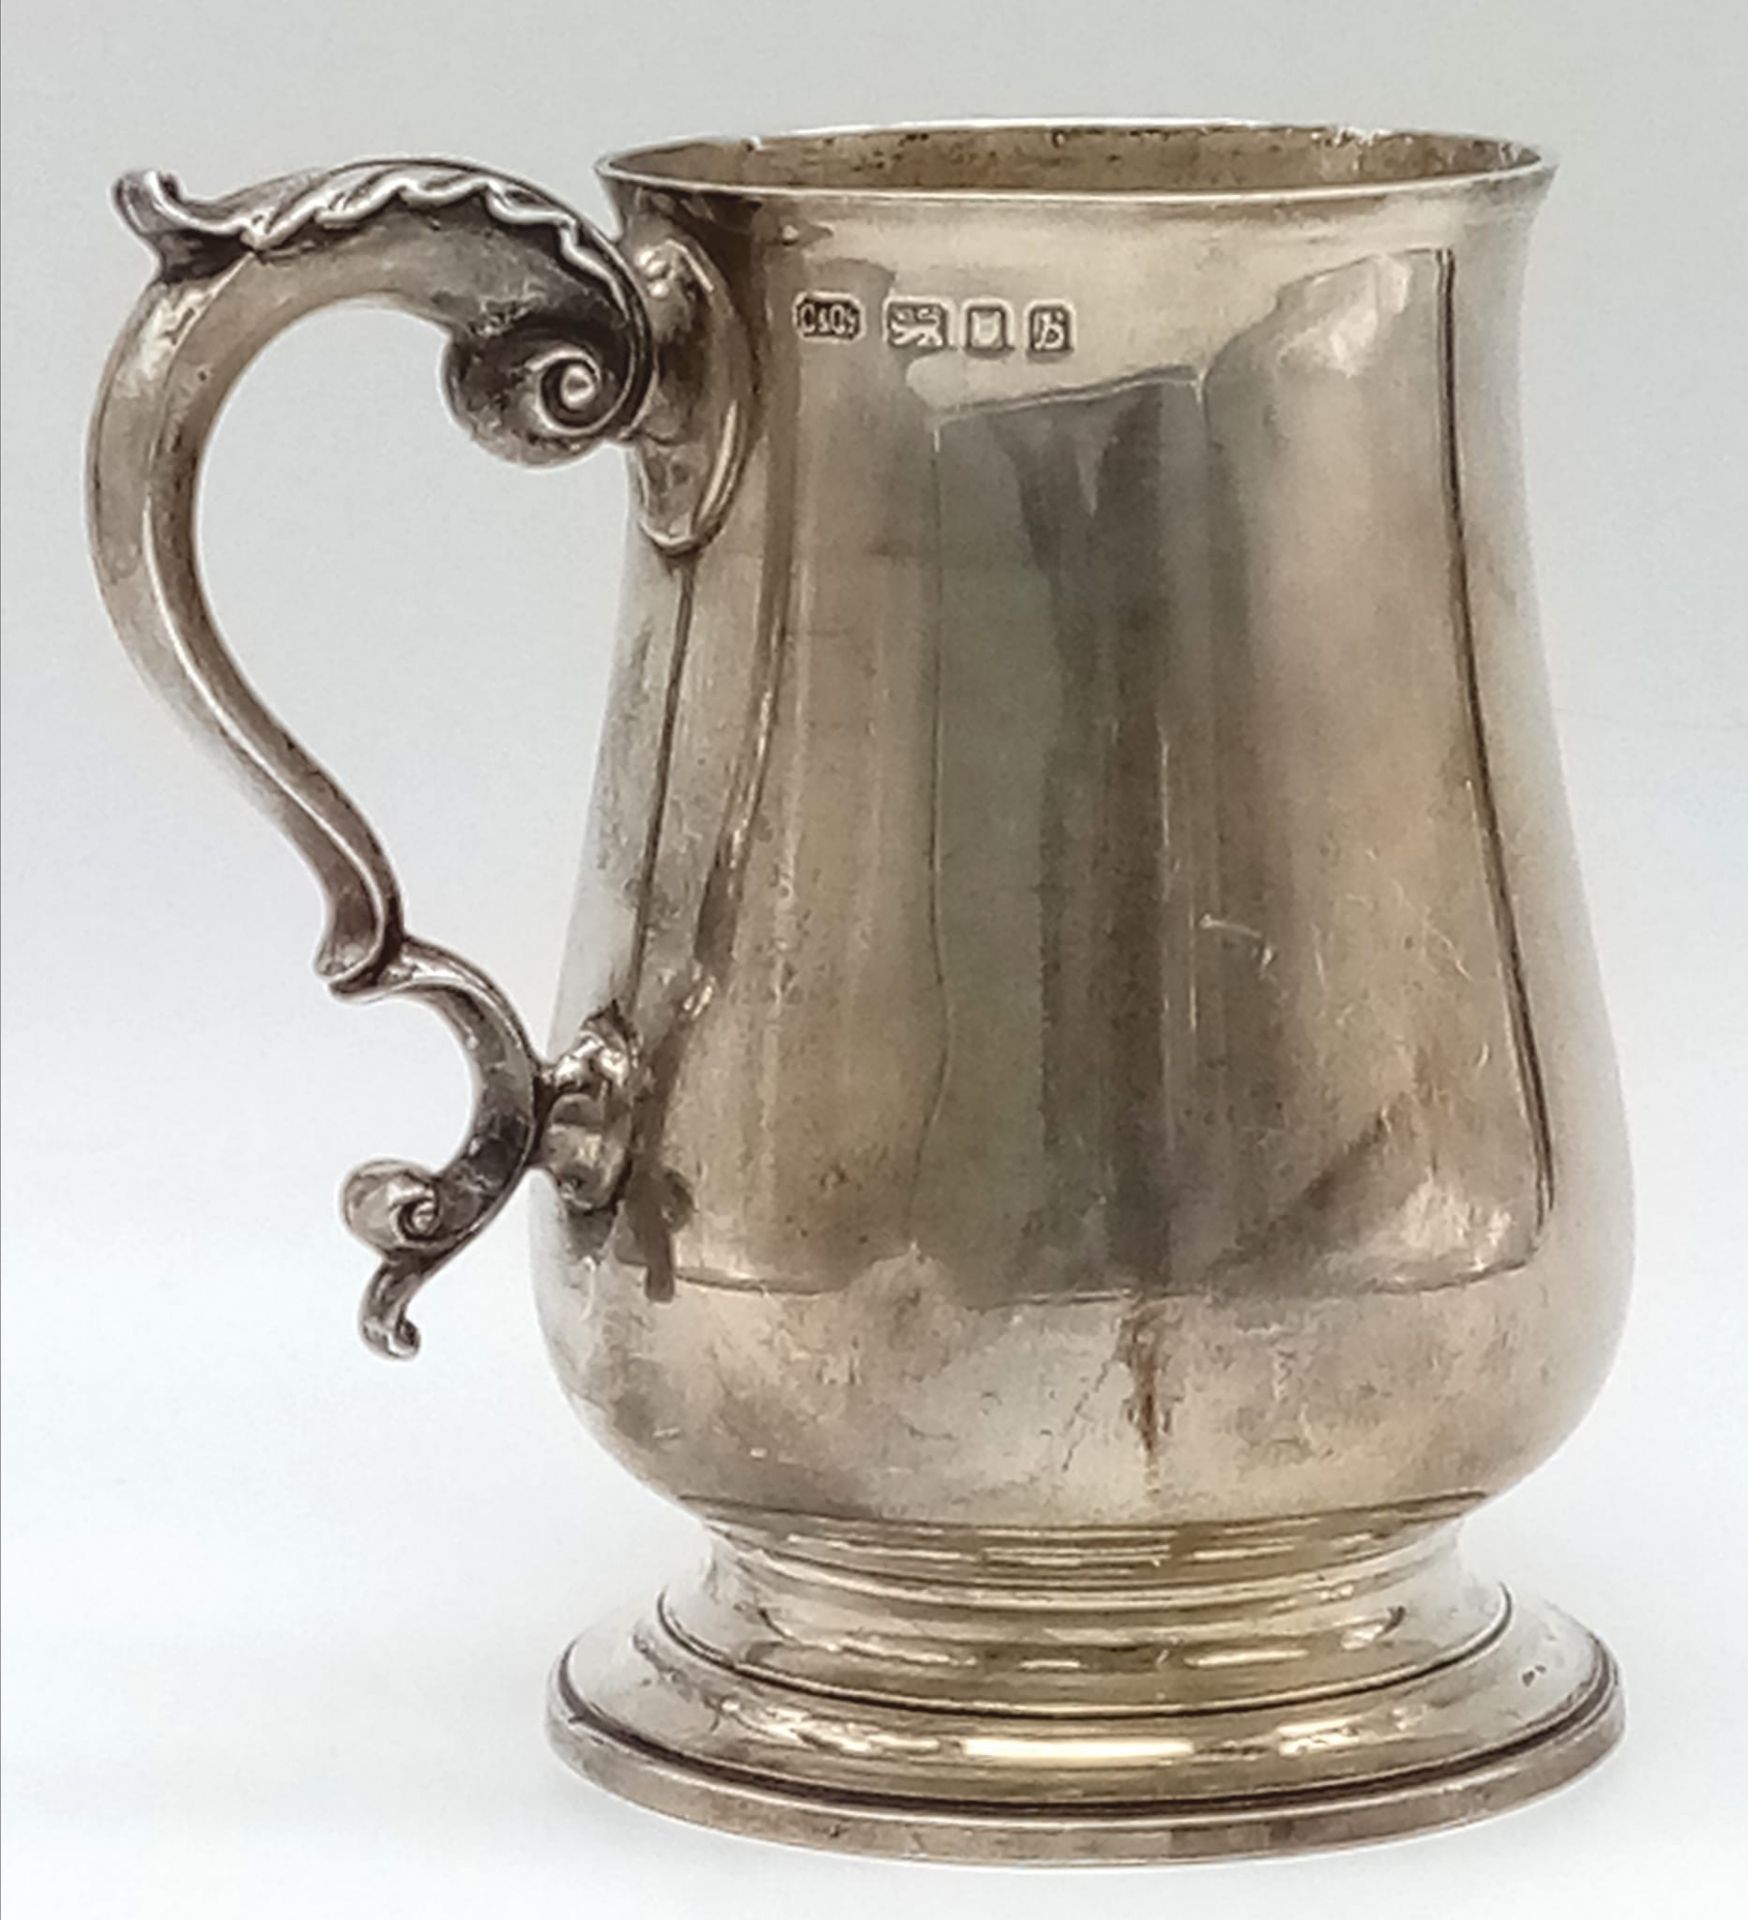 A Vintage Sterling Silver Tankard. Classic design with an ornate handle. 14cm tall. Hallmarks for